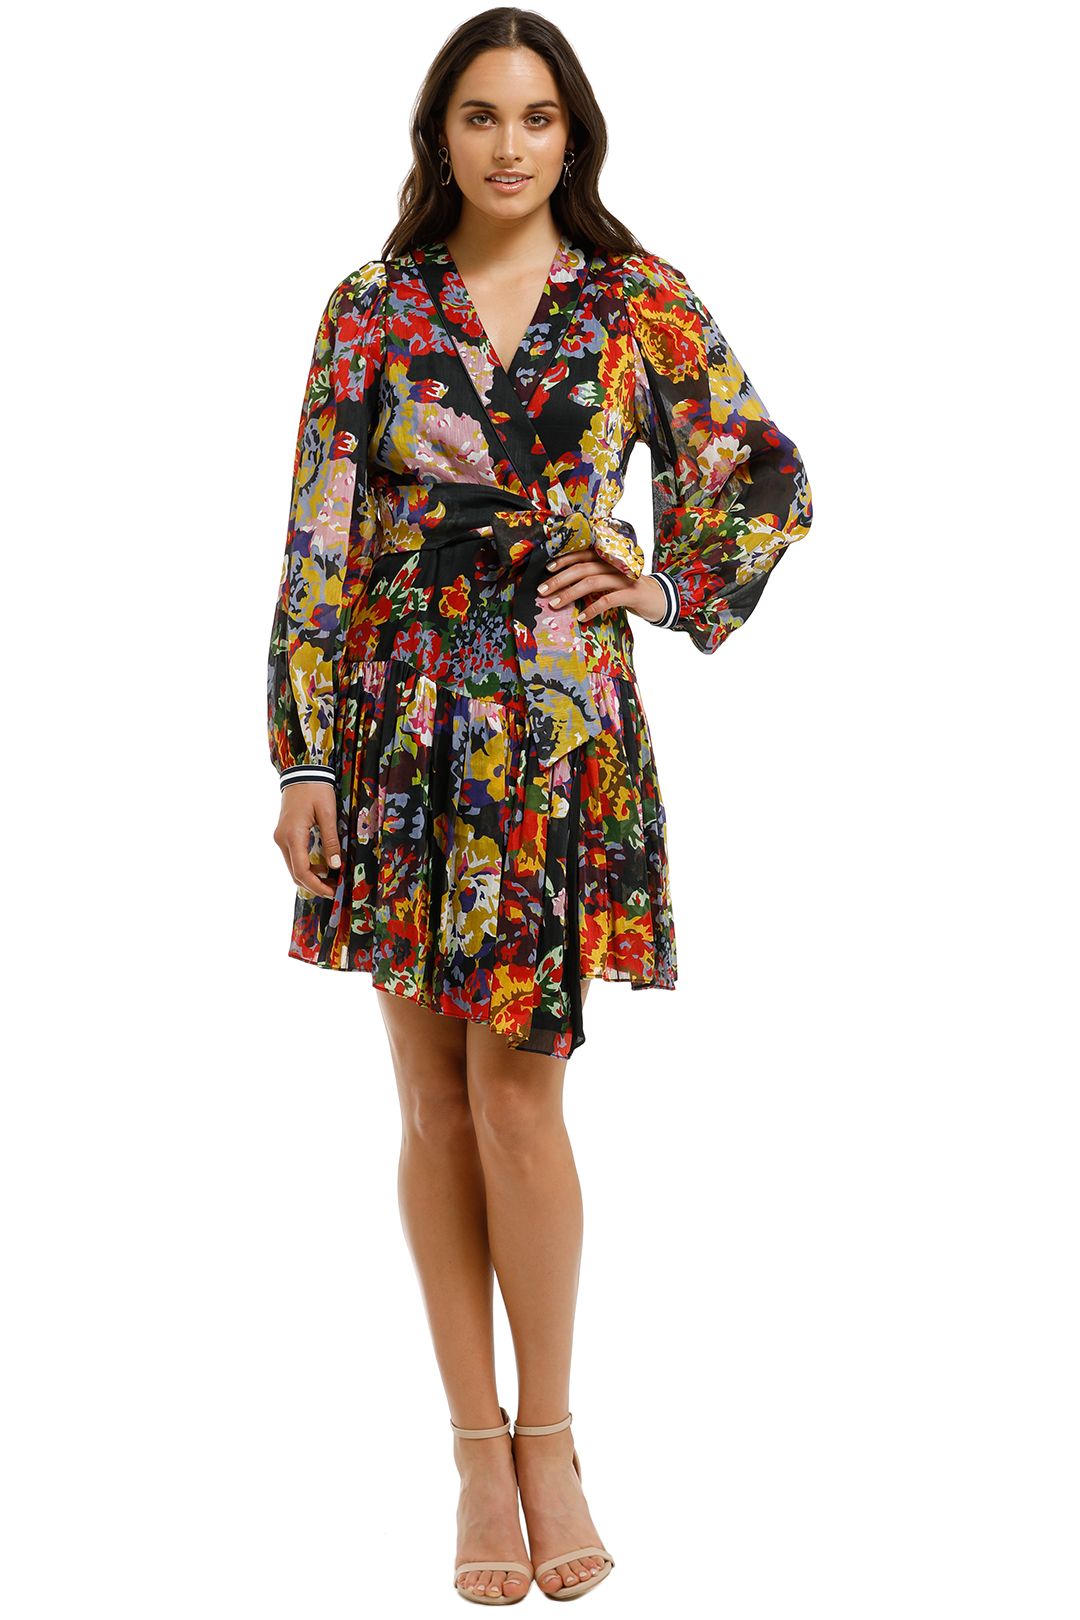 Arcadian Wrap Dress by Ginger and Smart for Hire | GlamCorner